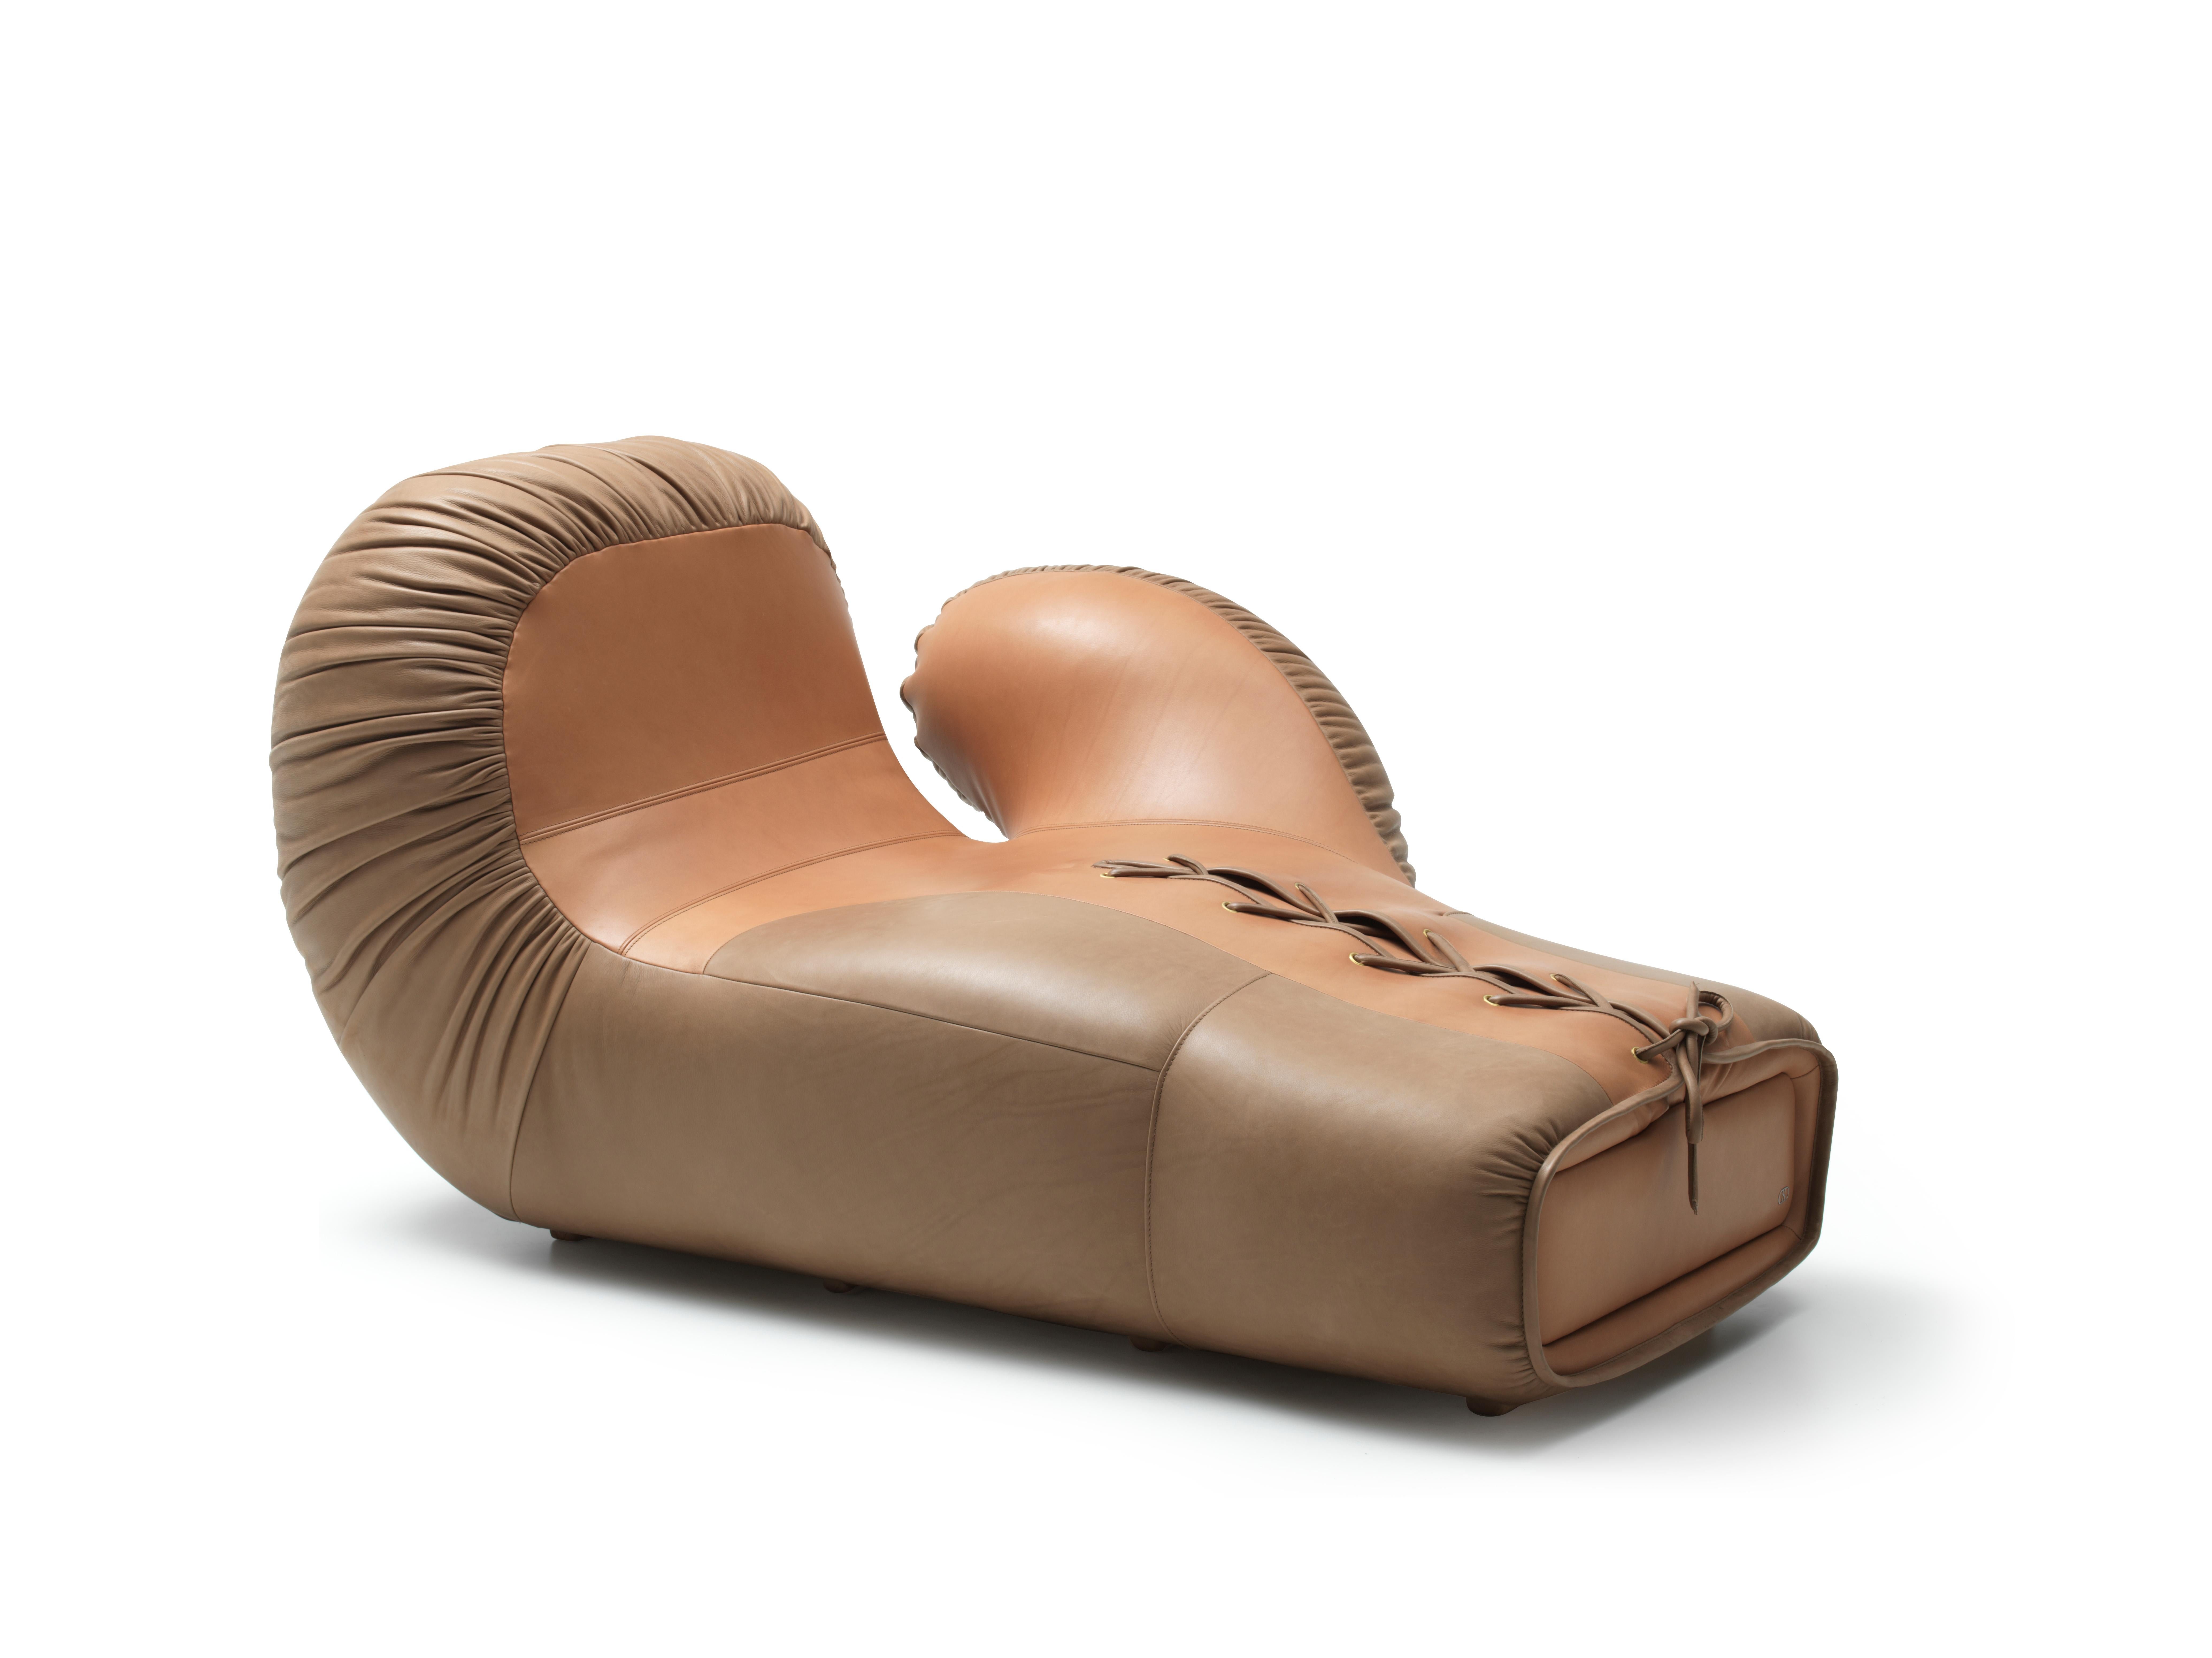 DS-2878 sofa by De Sede
Dimensions: D 170 x W 104 x H 86 cm
Materials: board material, leather

Prices may change according to the chosen materials and size. 

A re-edition that beats everything

The de Sede boxing glove, DS-2878,